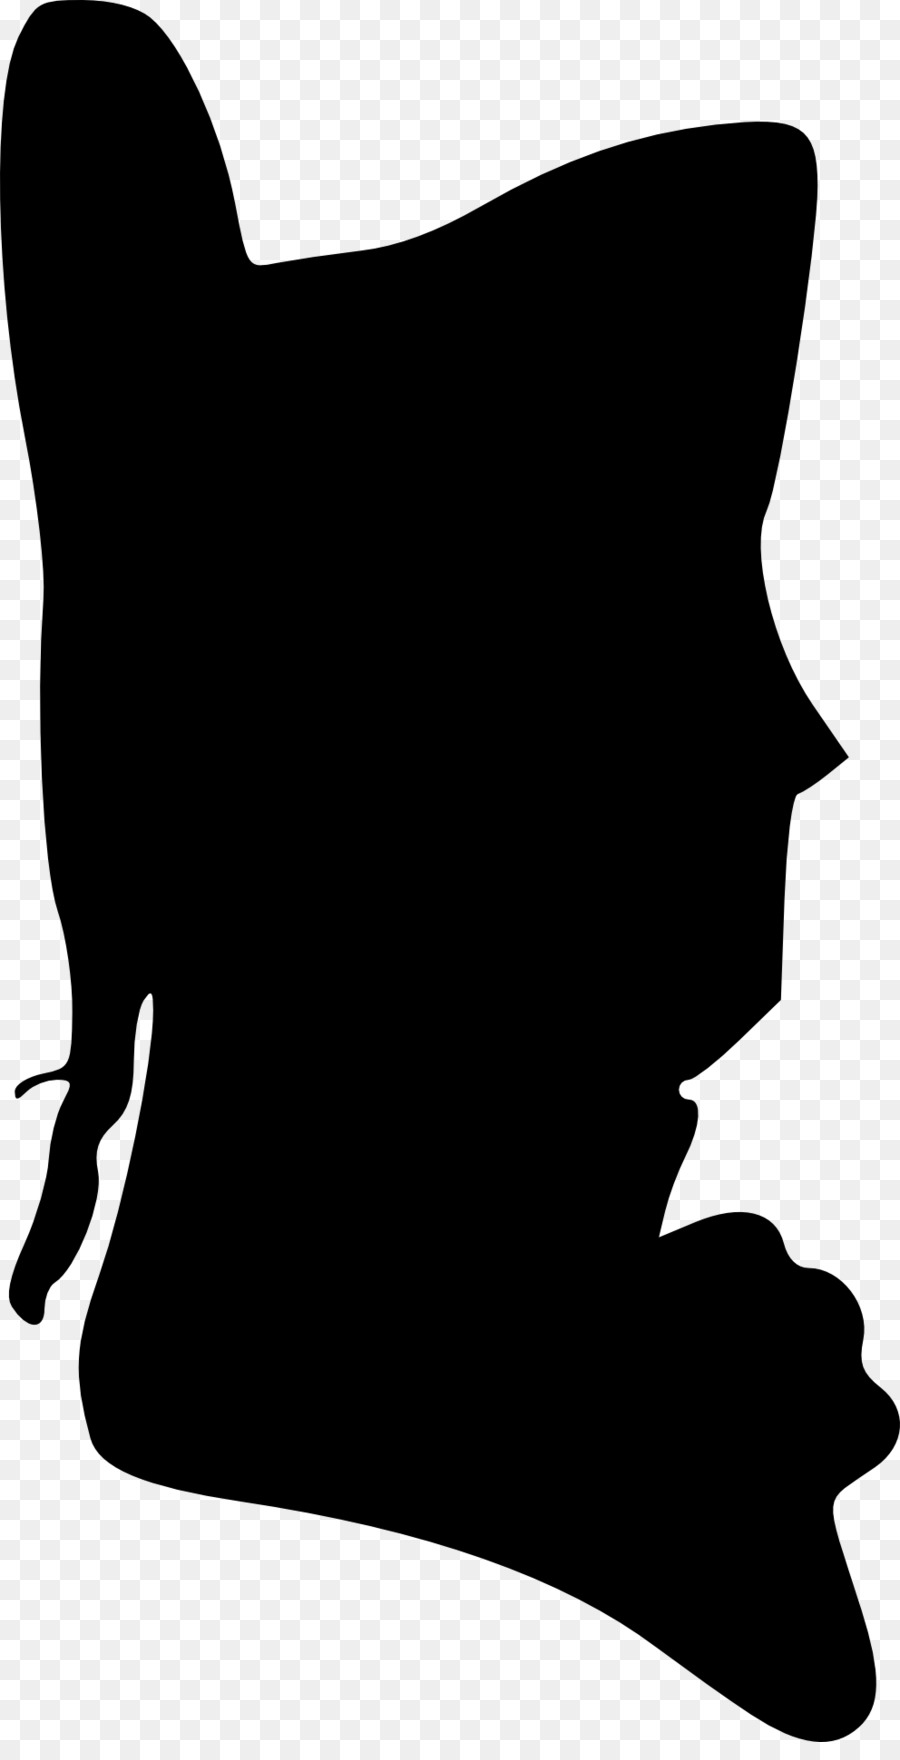 Silhouette Person Black and white - Silhouette png download - 992*1920 - Free Transparent Silhouette png Download.